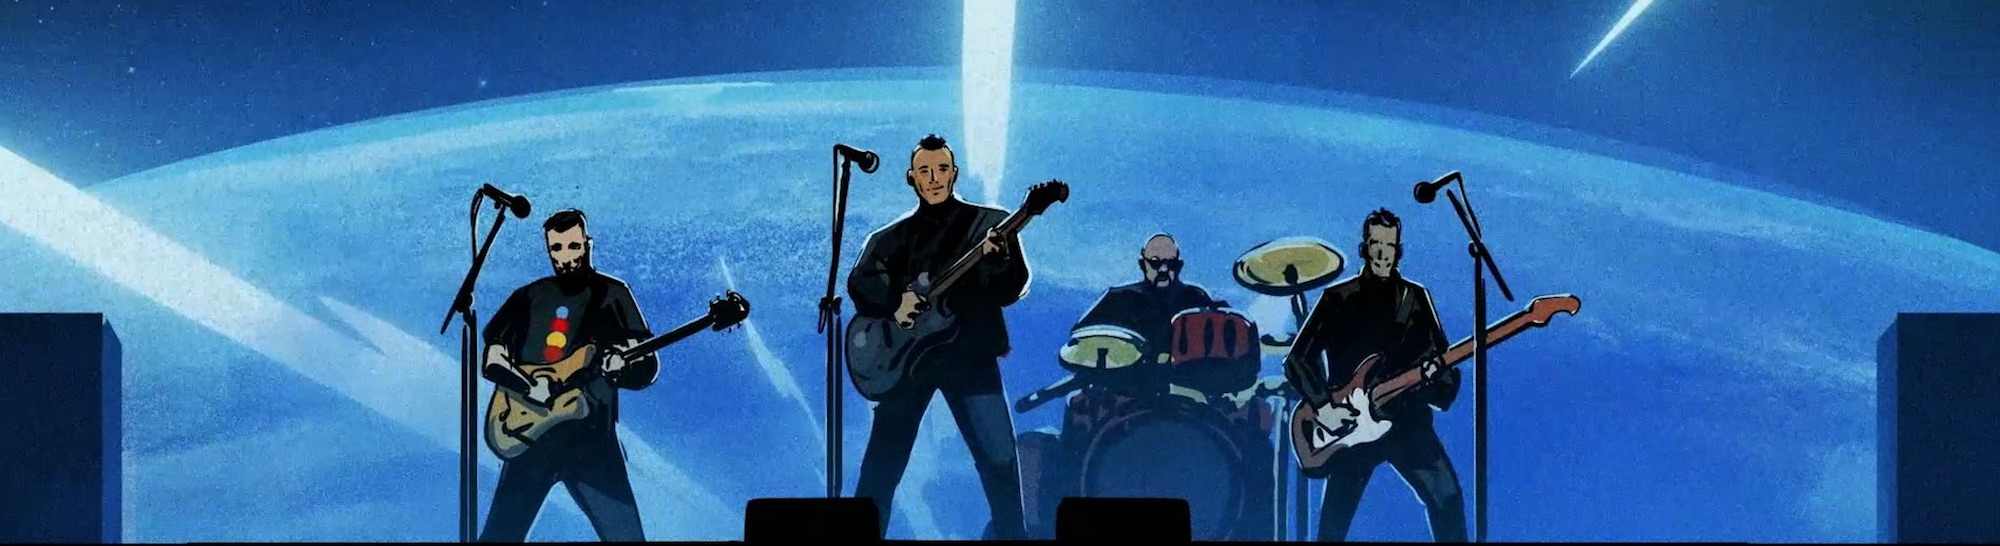 Marvel Gives Barenaked Ladies the Comic Book Treatment in “New Disaster” Video